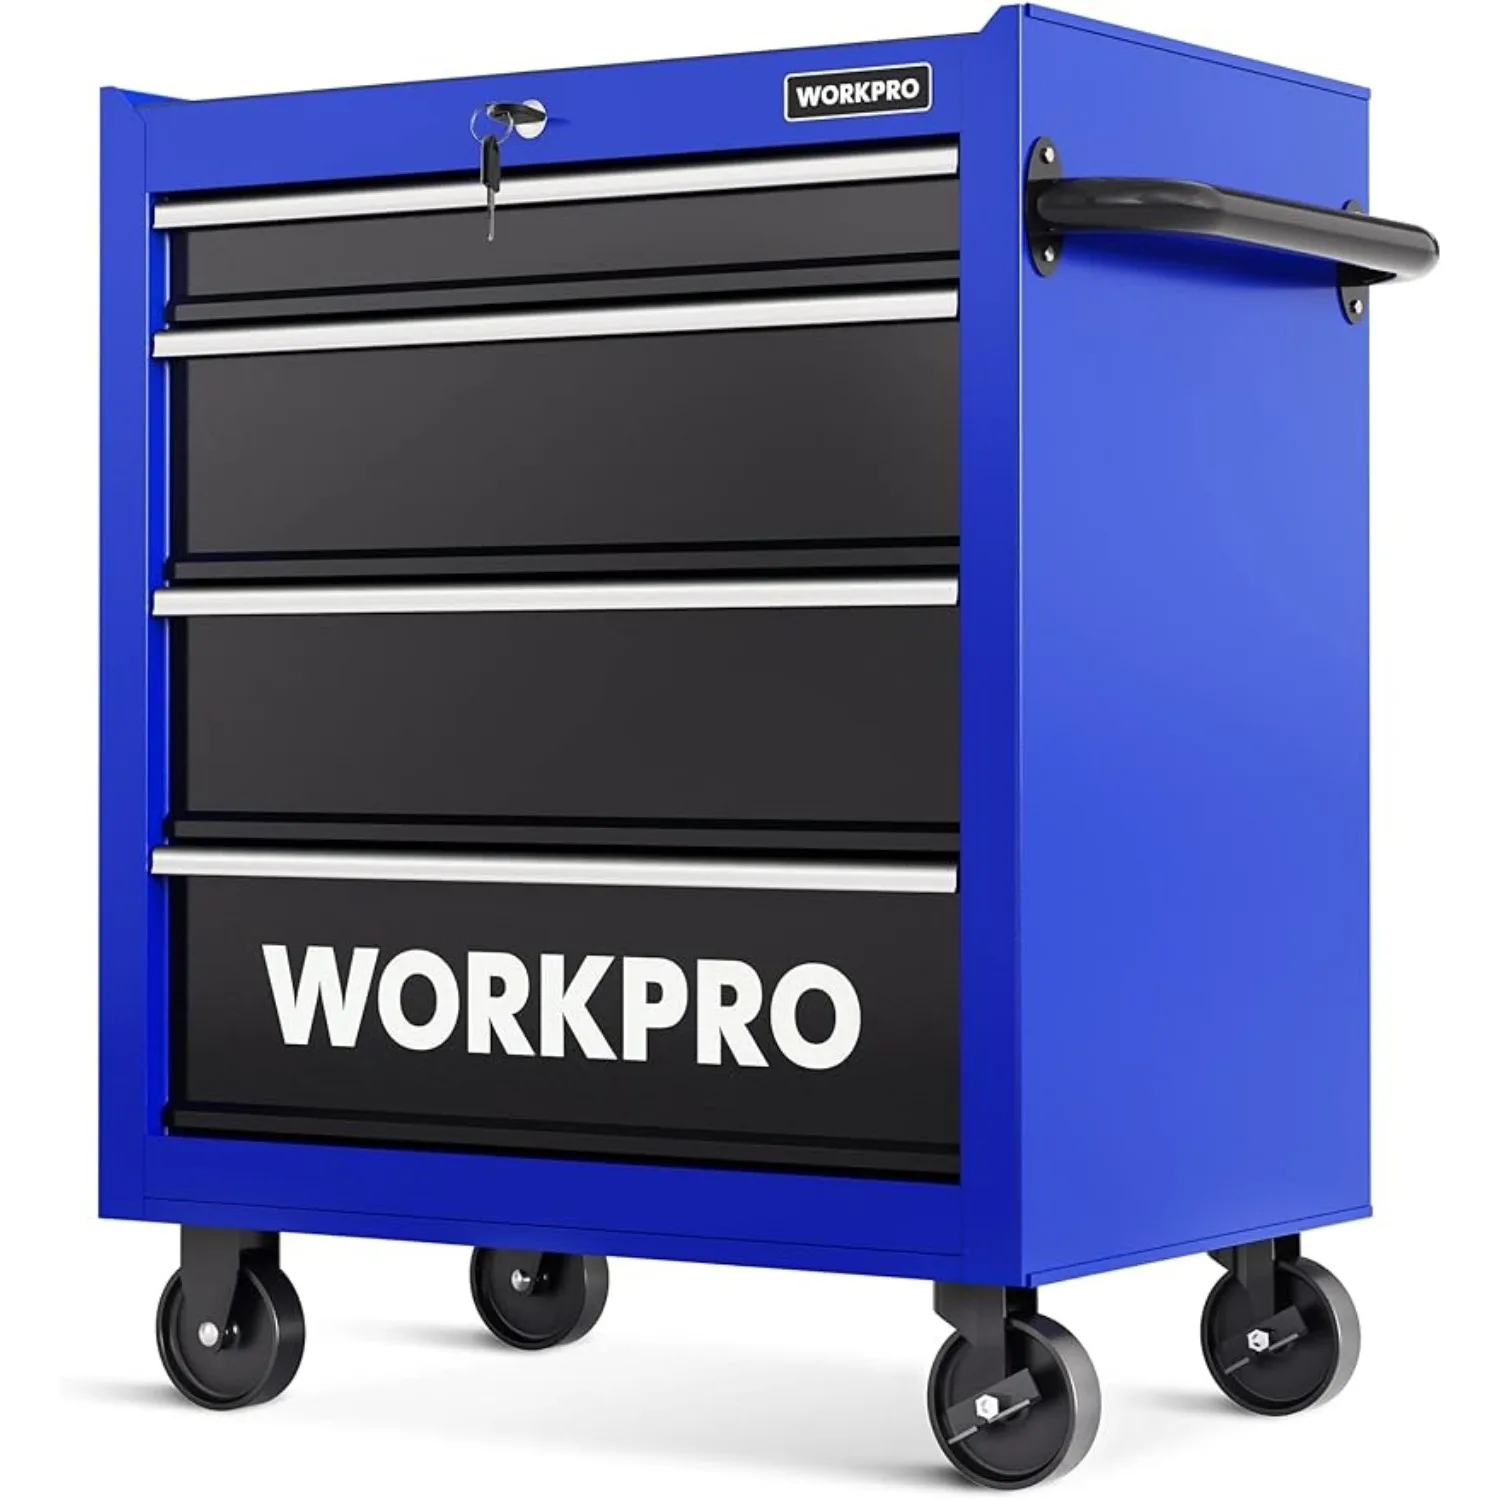 

WORKPRO 4-Drawer Tool Chest 26-Inch Rolling Metal Storage Cabinet with Casters Locking System Drawer Liner 450 Lbs Load Capacity